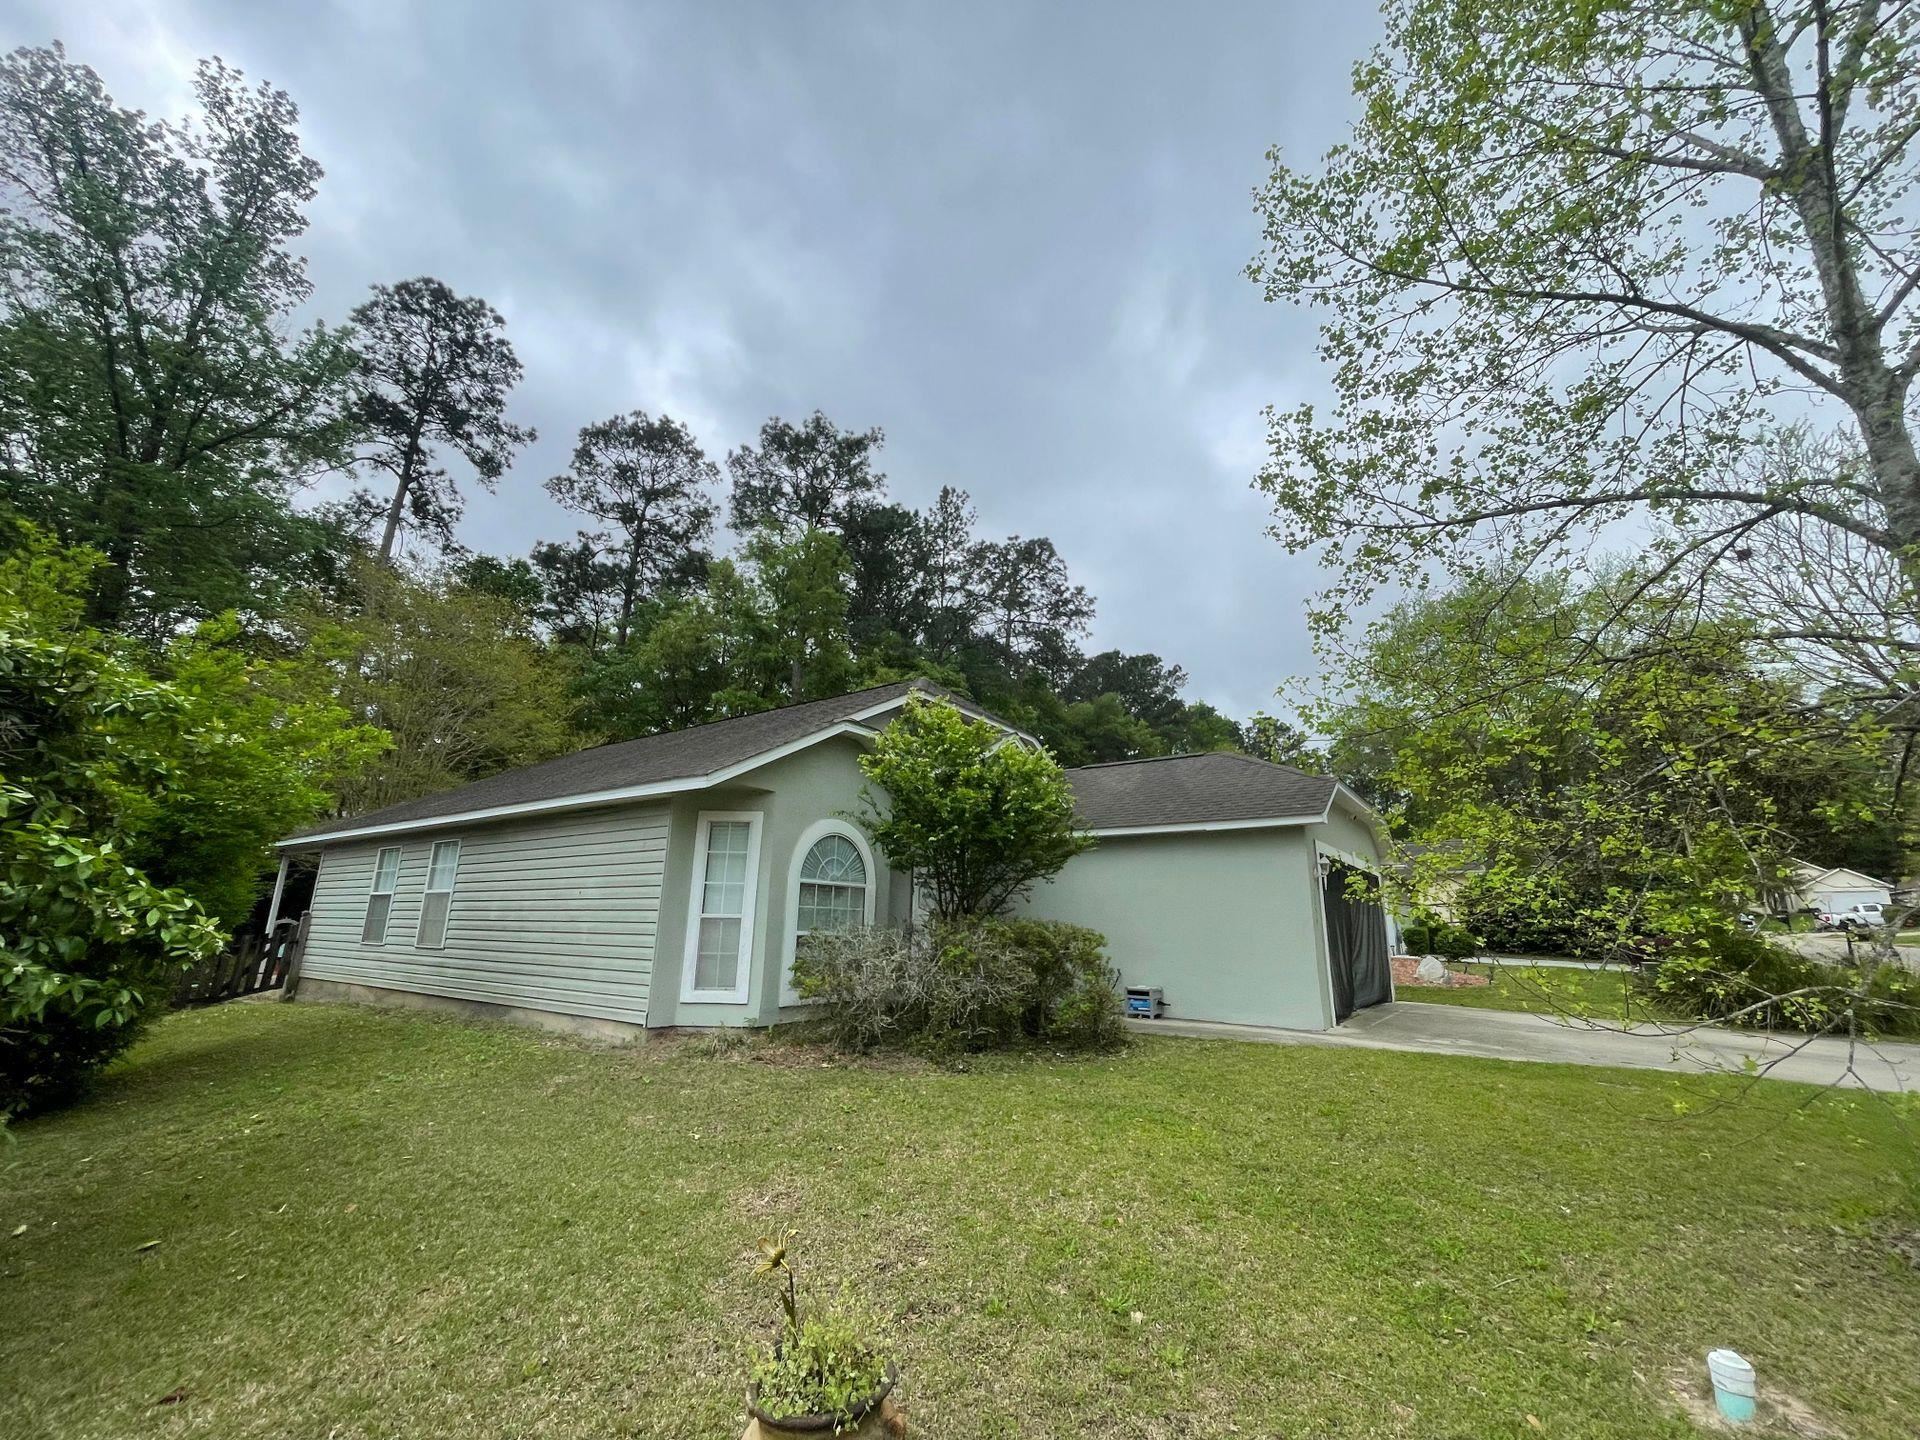 1754 Newman Lane,TALLAHASSEE,Florida 32312,3 Bedrooms Bedrooms,2 BathroomsBathrooms,Detached single family,1754 Newman Lane,370141